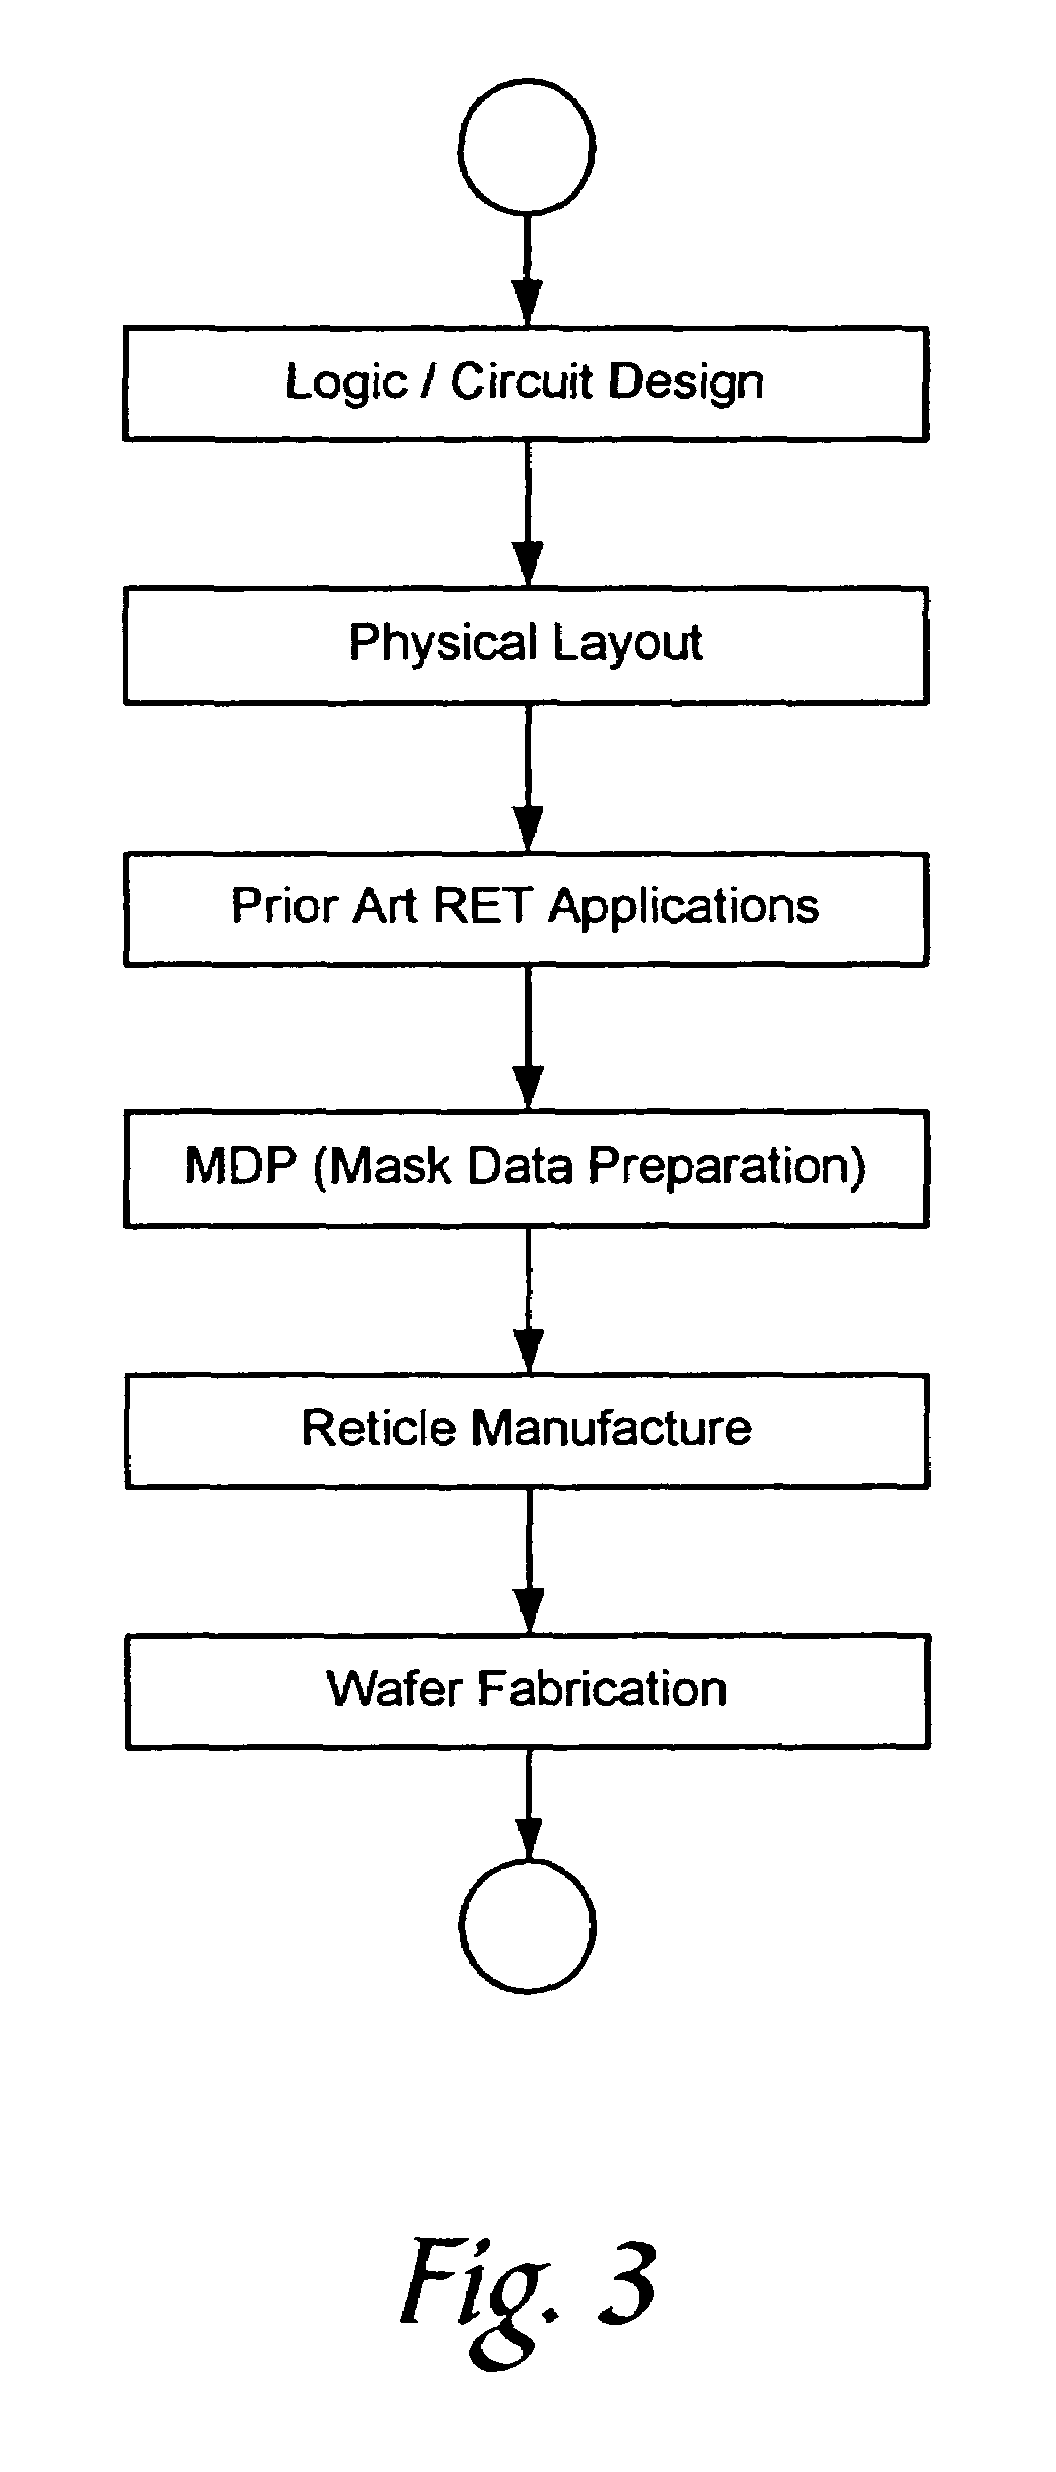 System and method for reducing patterning variability in integrated circuit manufacturing through mask layout corrections